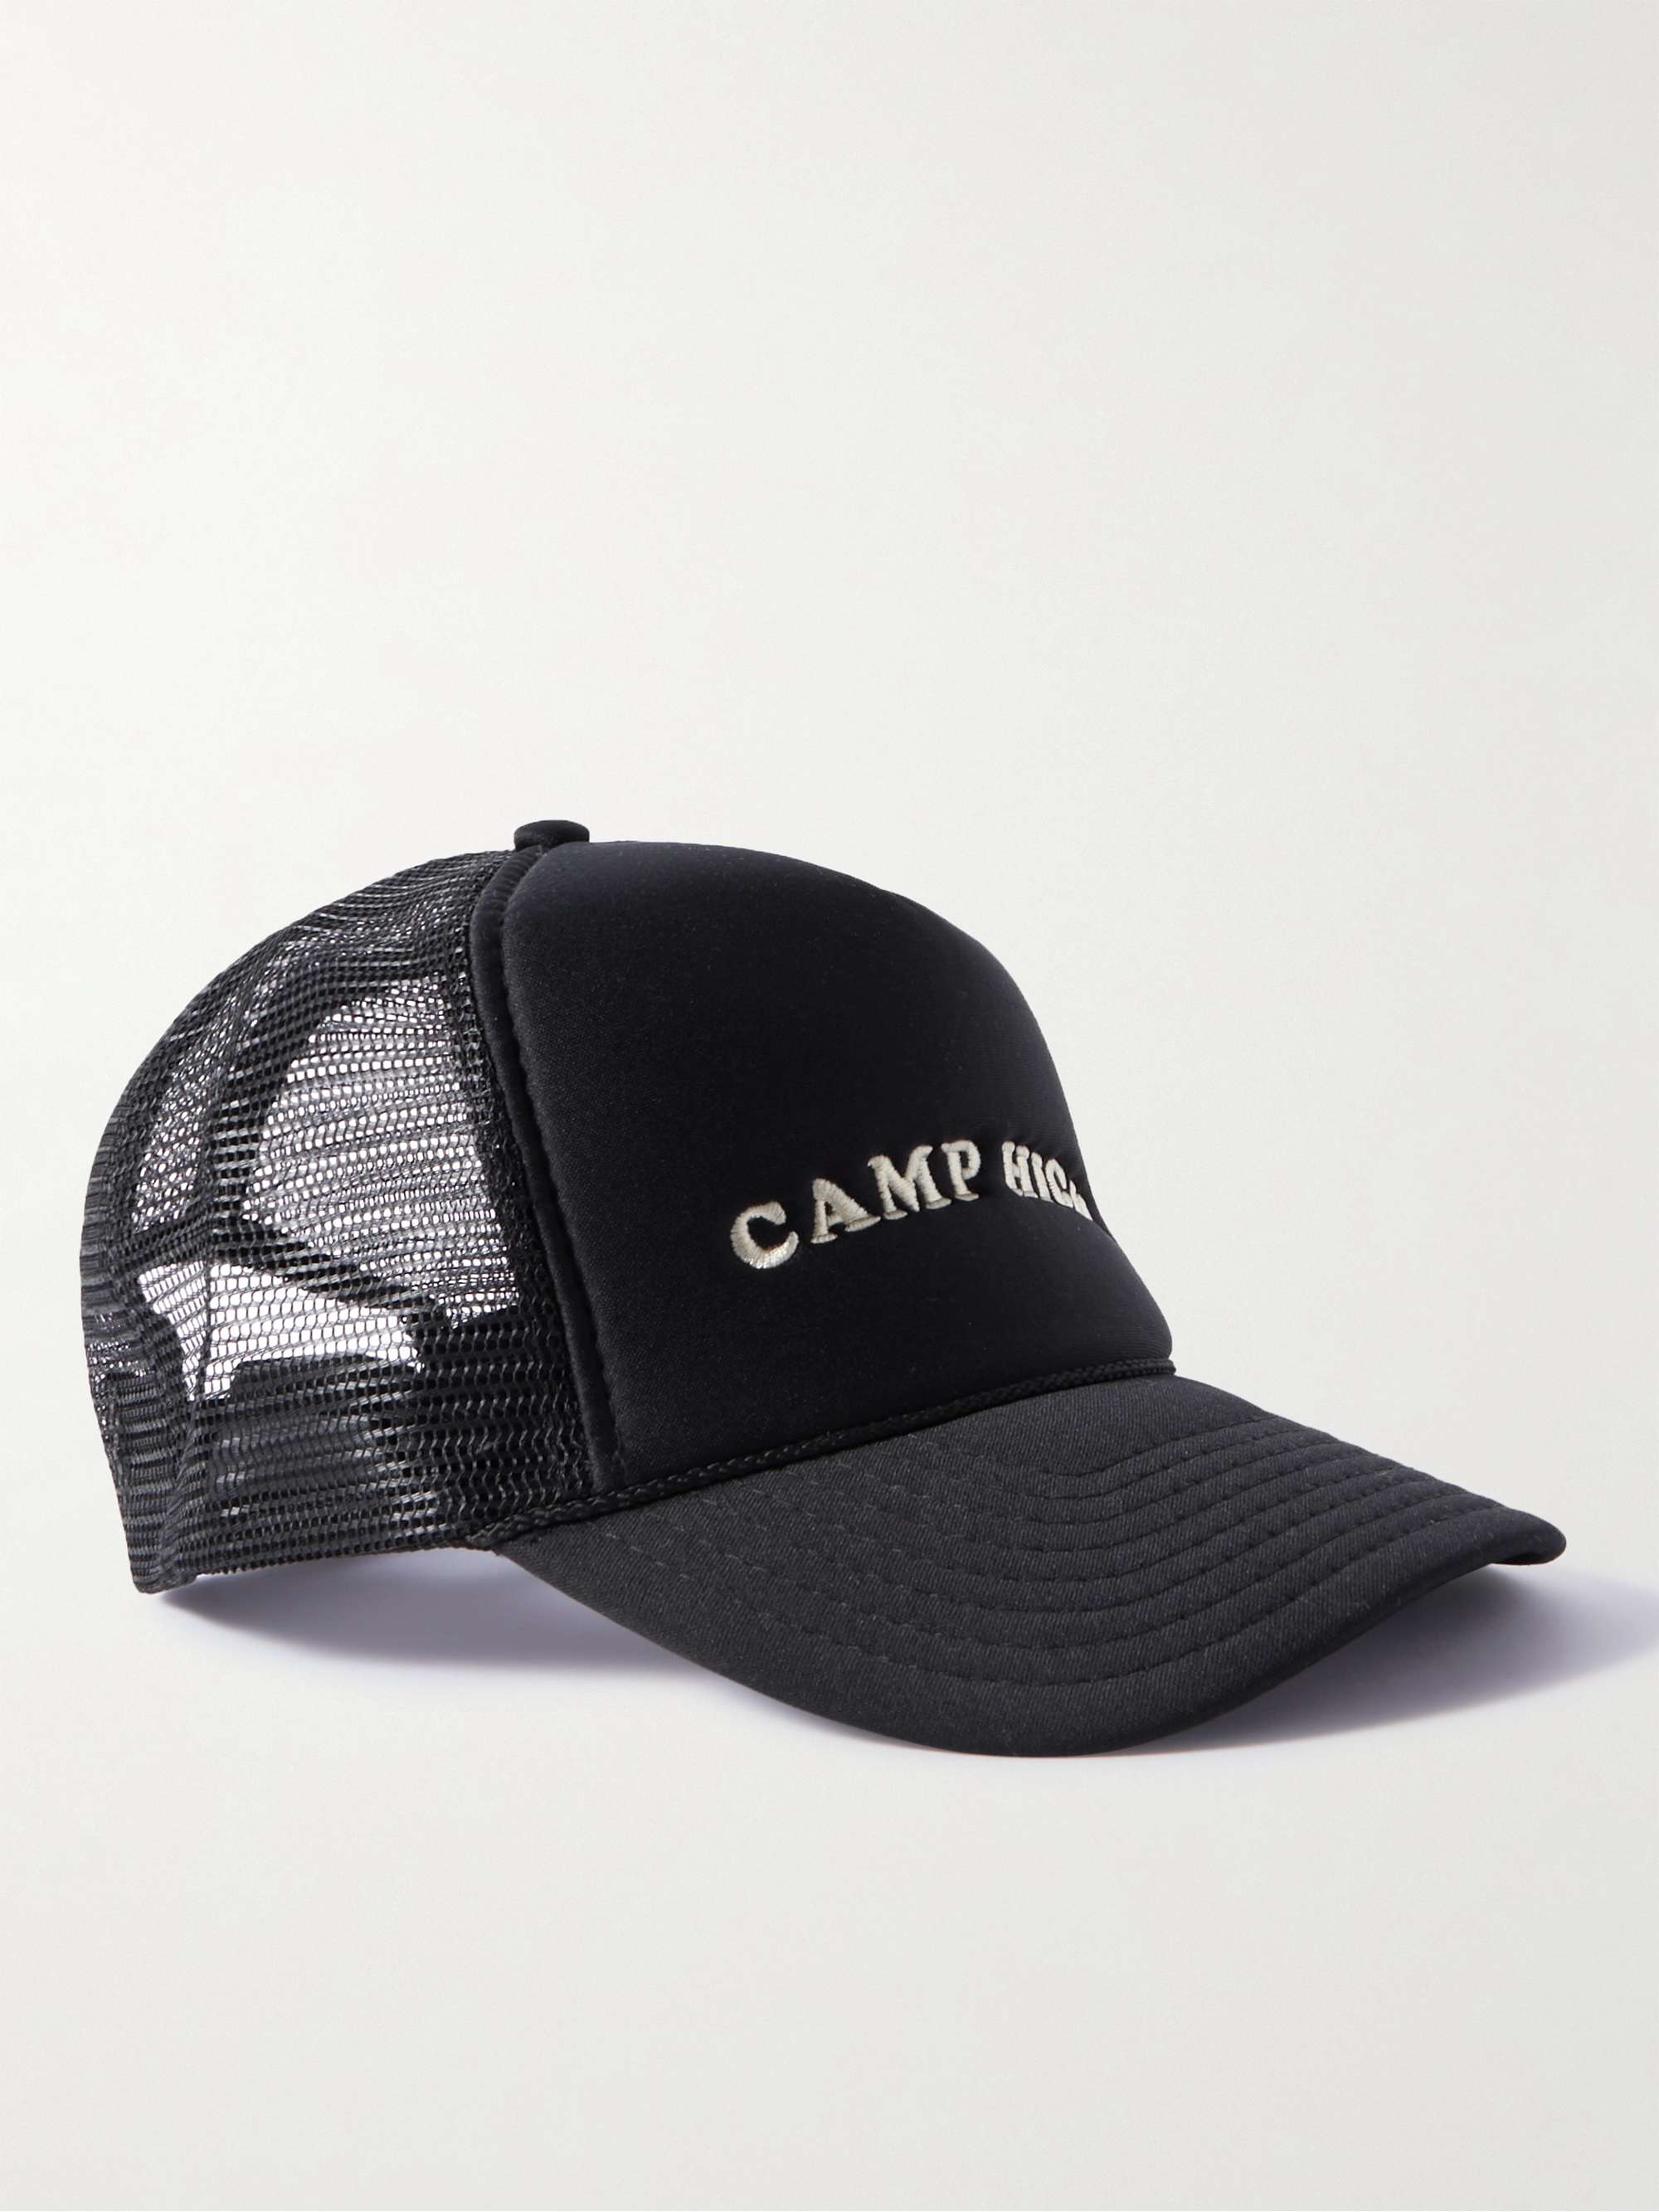 Black Logo-Embroidered Twill and Mesh Trucker Hat | CAMP HIGH | MR PORTER